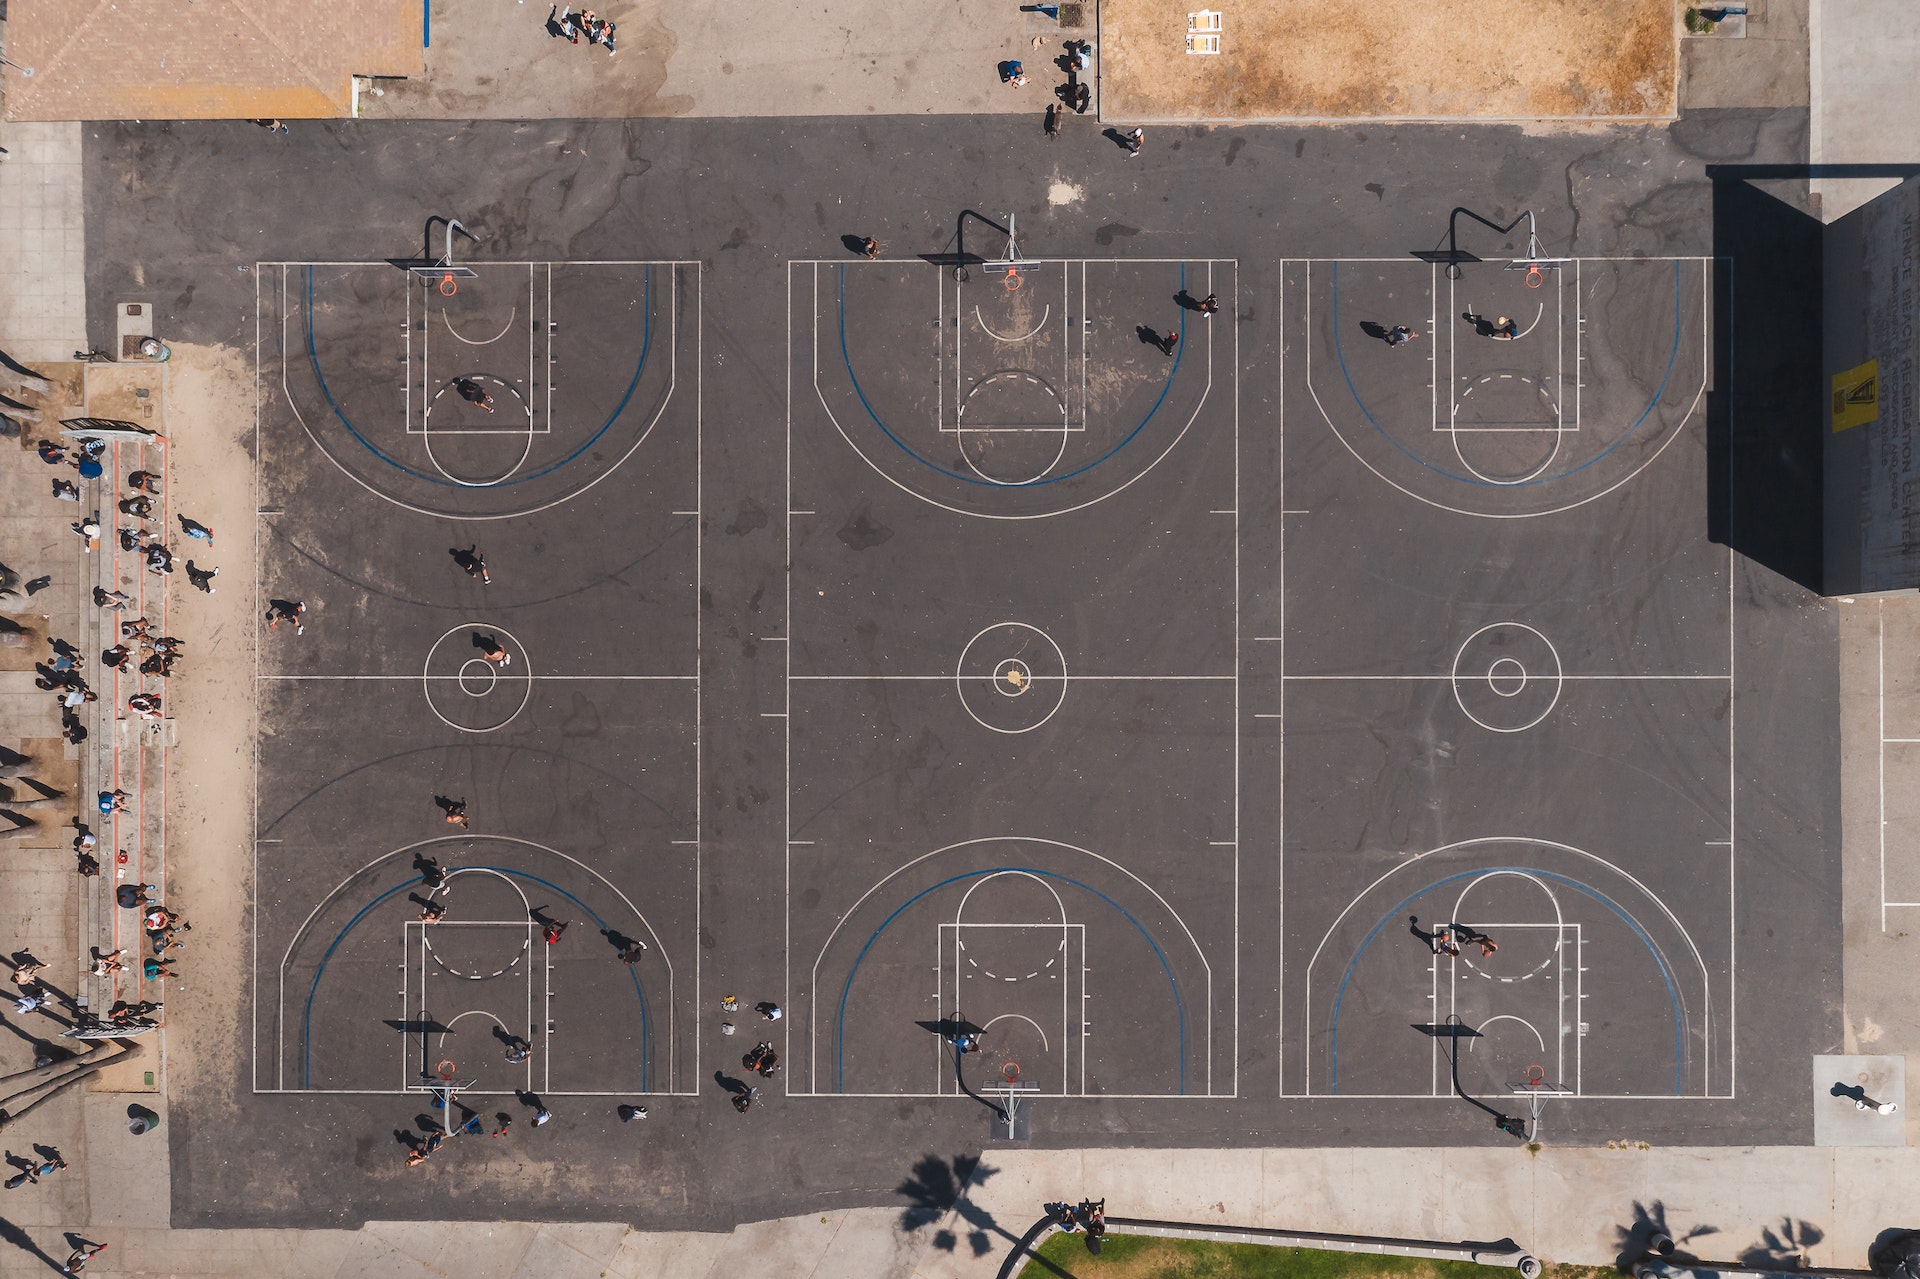 Basketball court with people from above